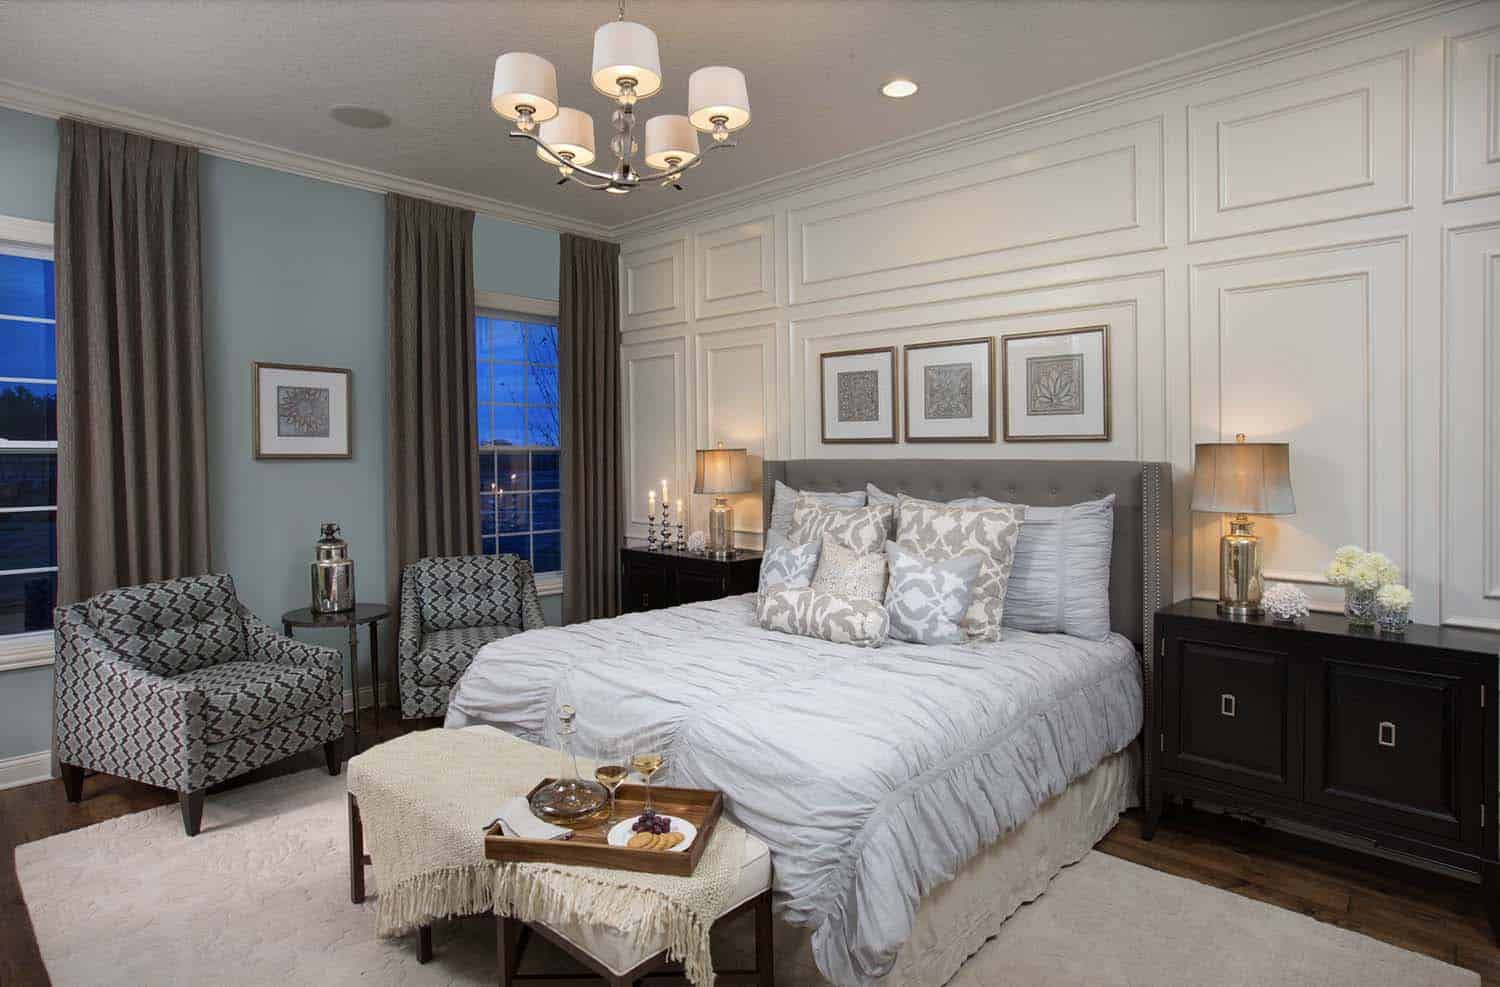 transitional style bedroom with an applied molding accent wall behind the bed